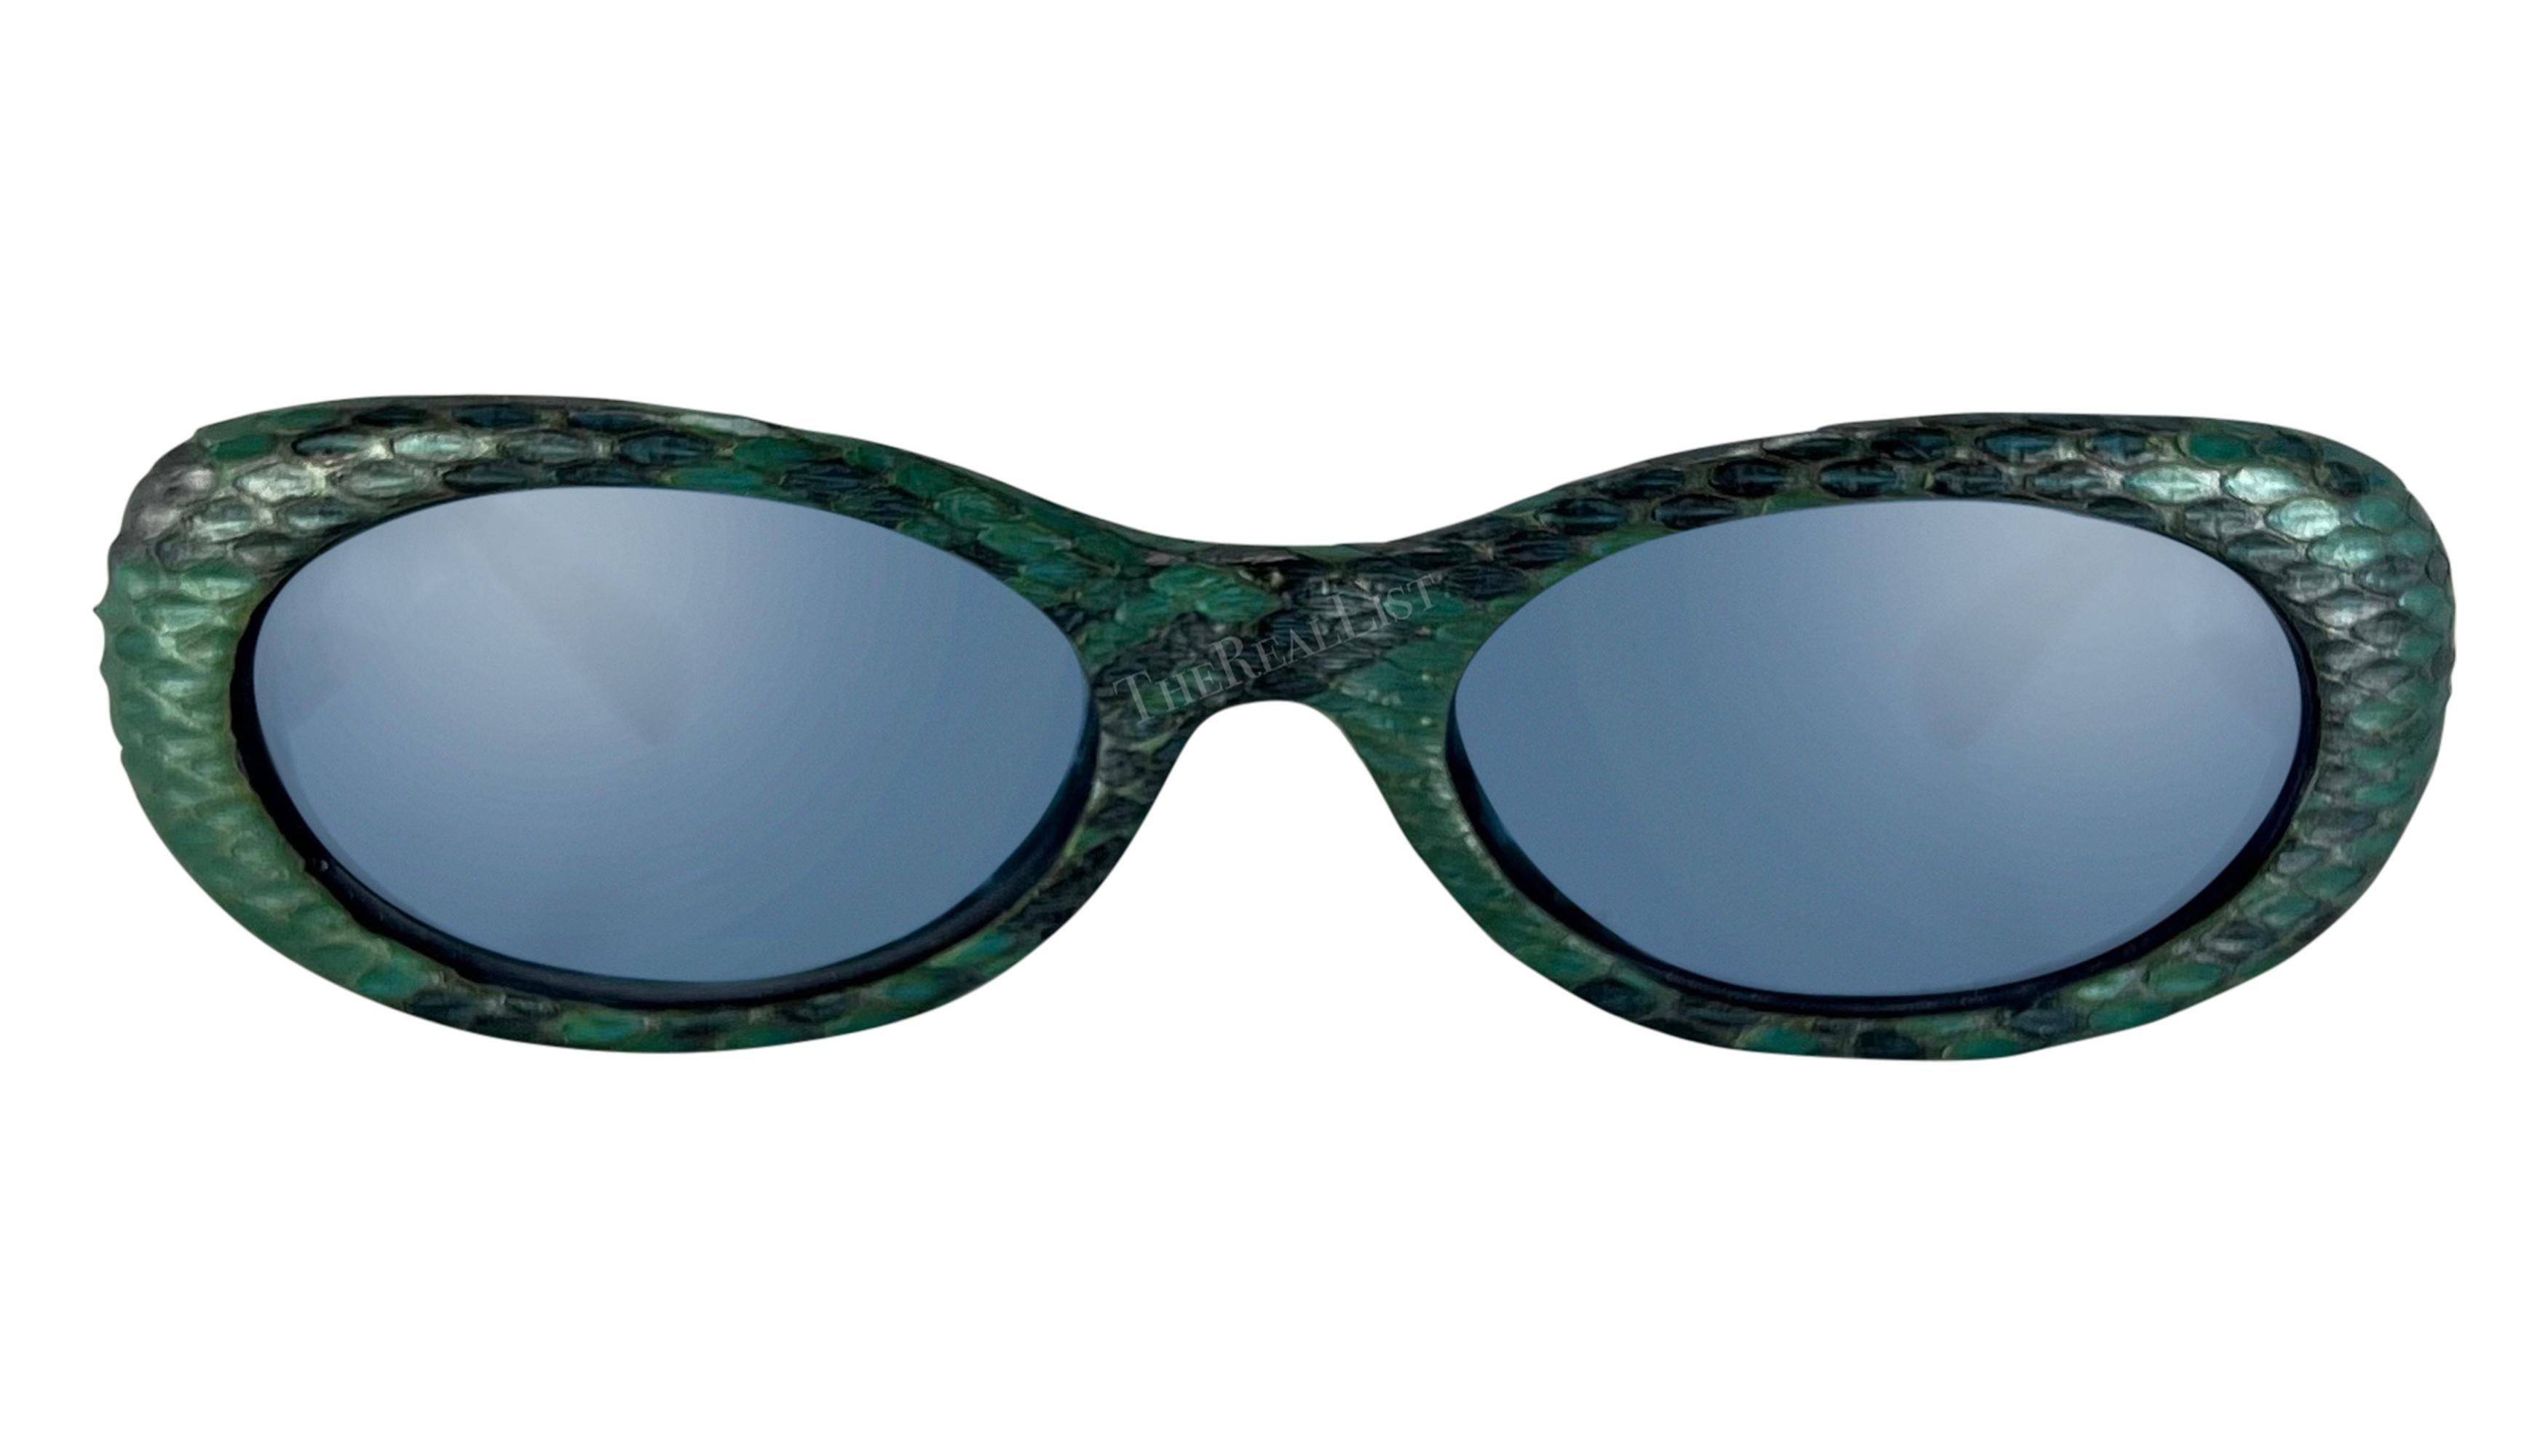 S/S 2000 Gianni Versace by Donatella Blue Genuine Python Oval Sunglasses In Good Condition For Sale In West Hollywood, CA